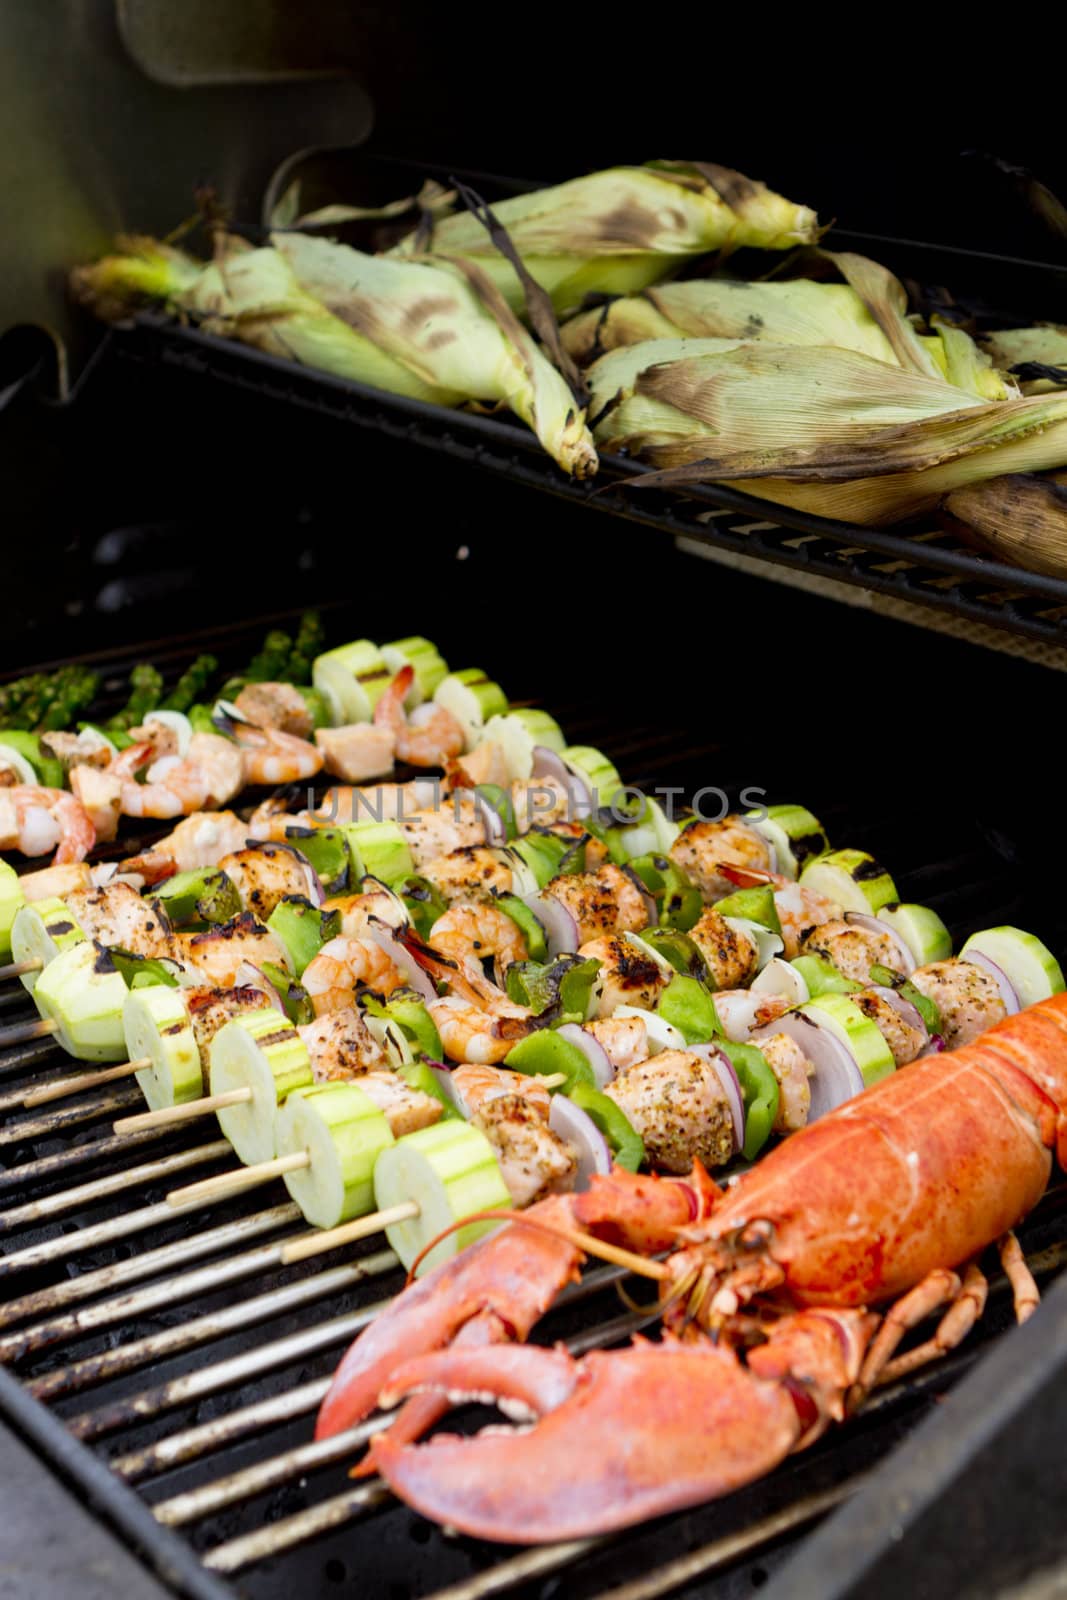 Salmon Skewers, Lobster and cornstalks are on the barbecue.